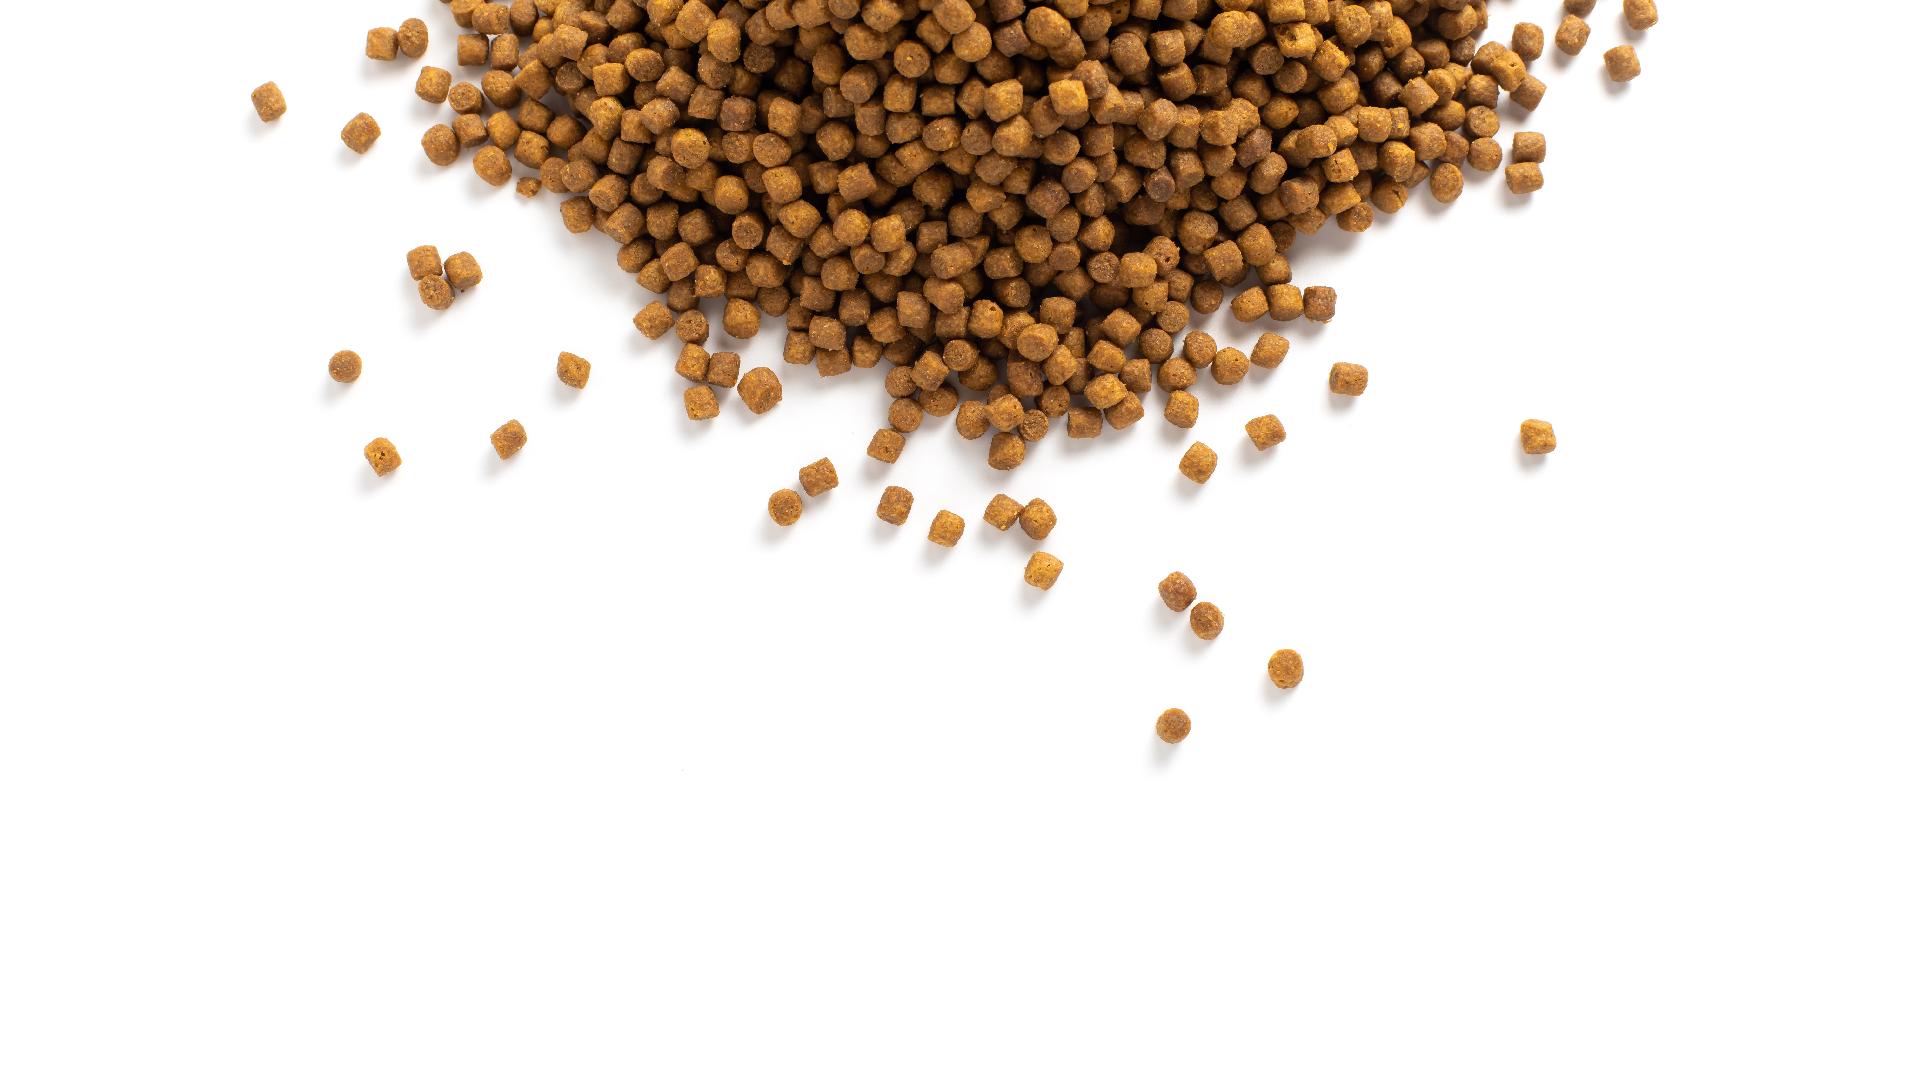 Market trends and the development of new protein sources in Pet Food